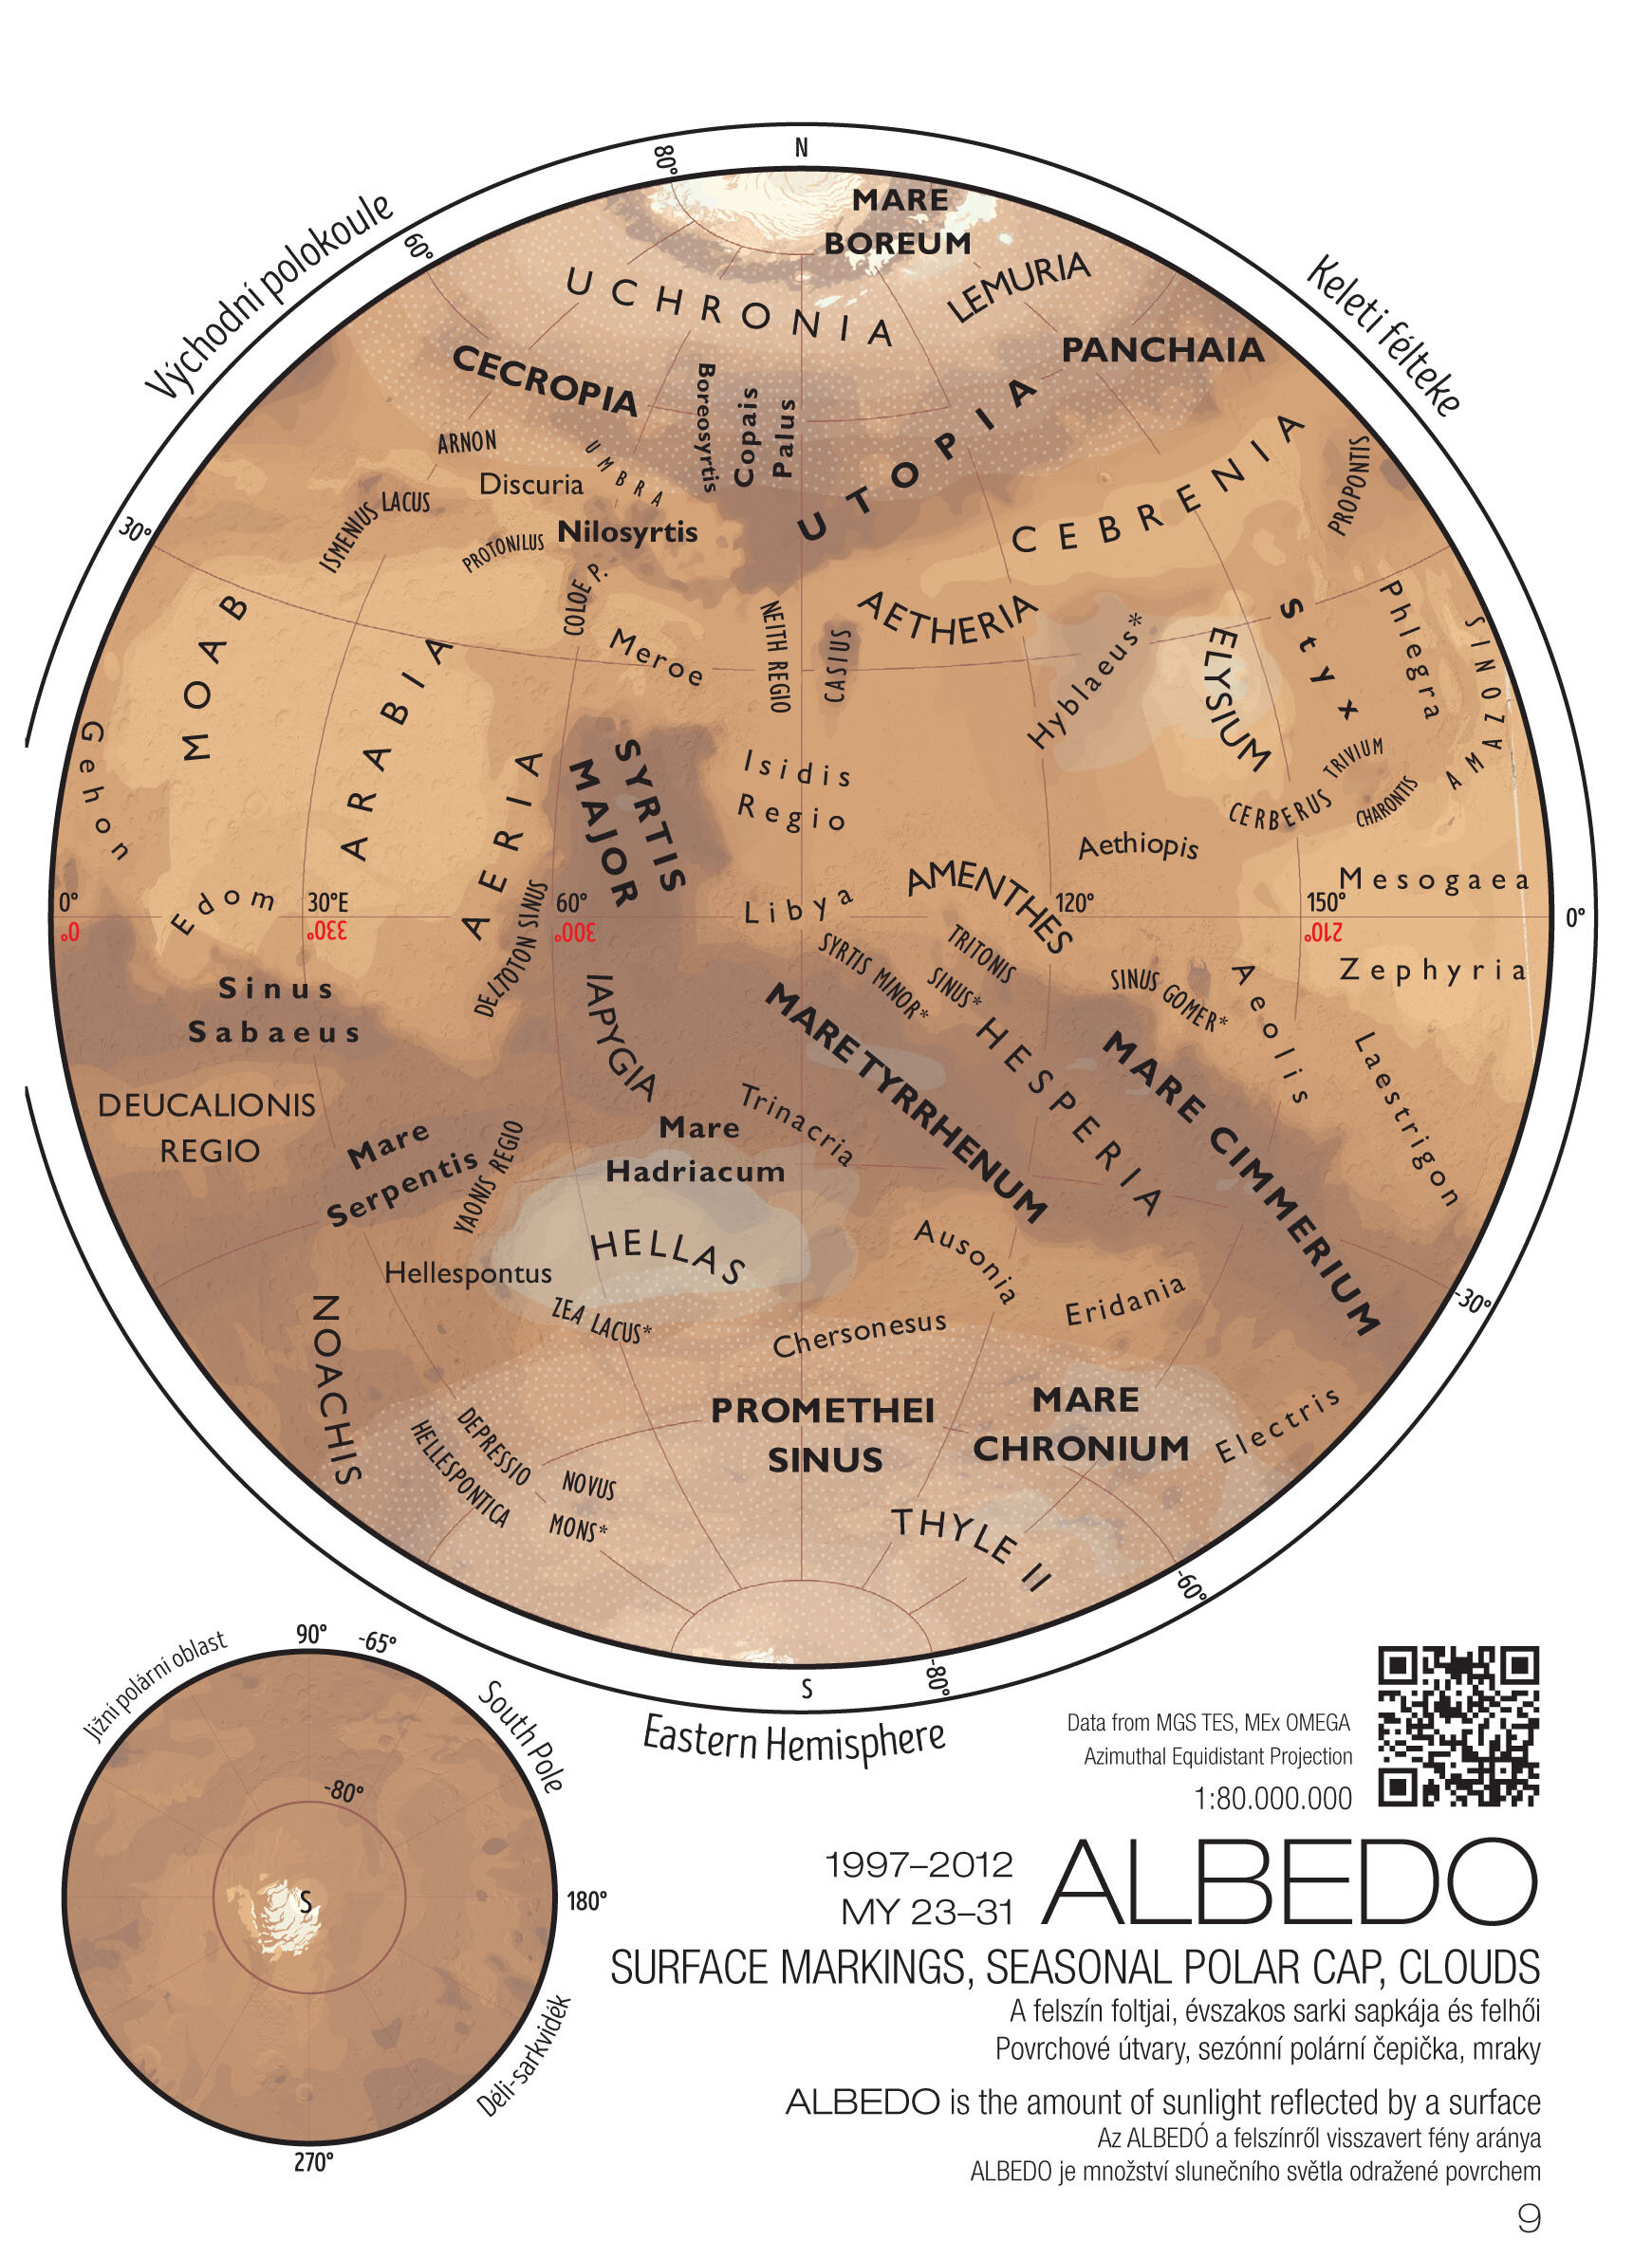 Now you can buy an atlas for the Red Planet